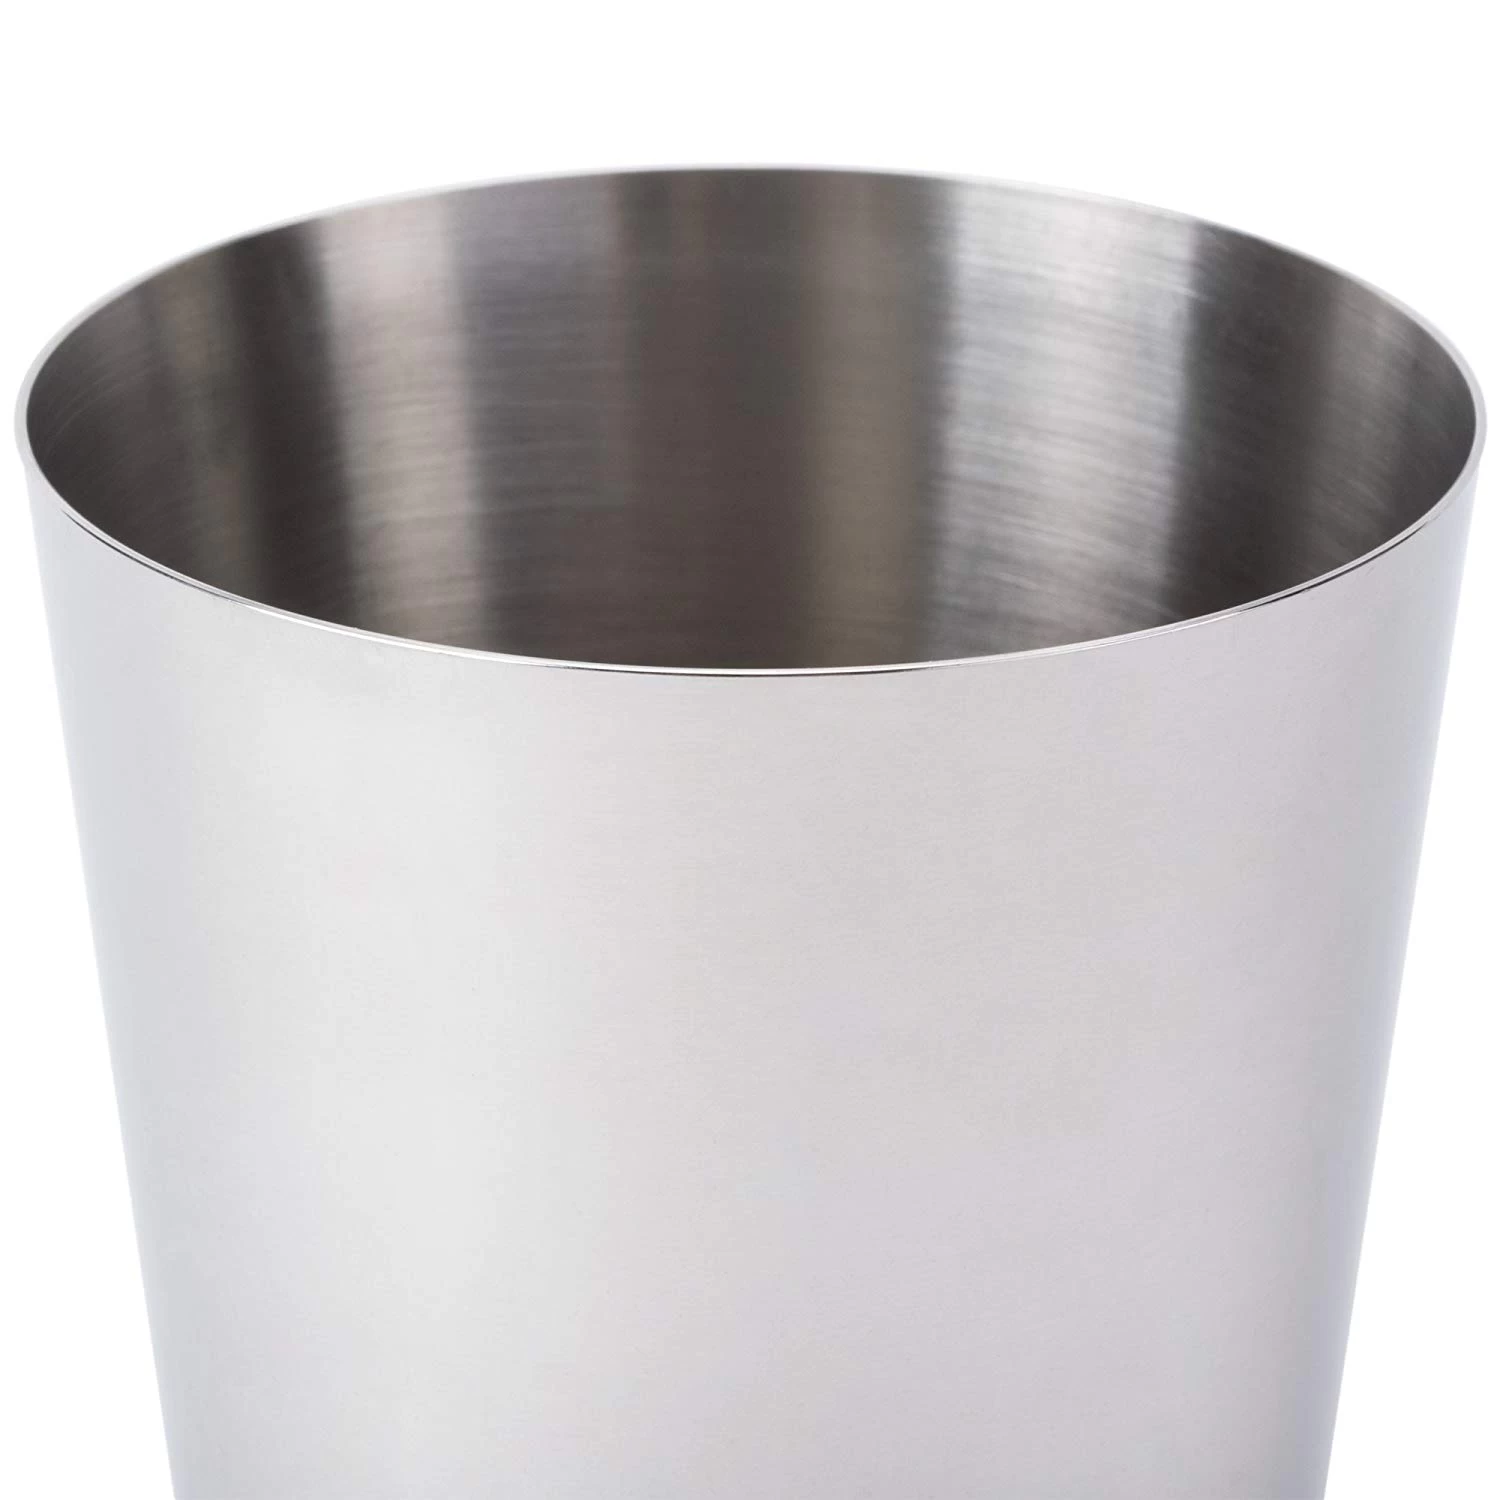 Stainless Steel Powder Shaker supplier, cocktail shaker manufacturer china, cocktail shaker supplier china